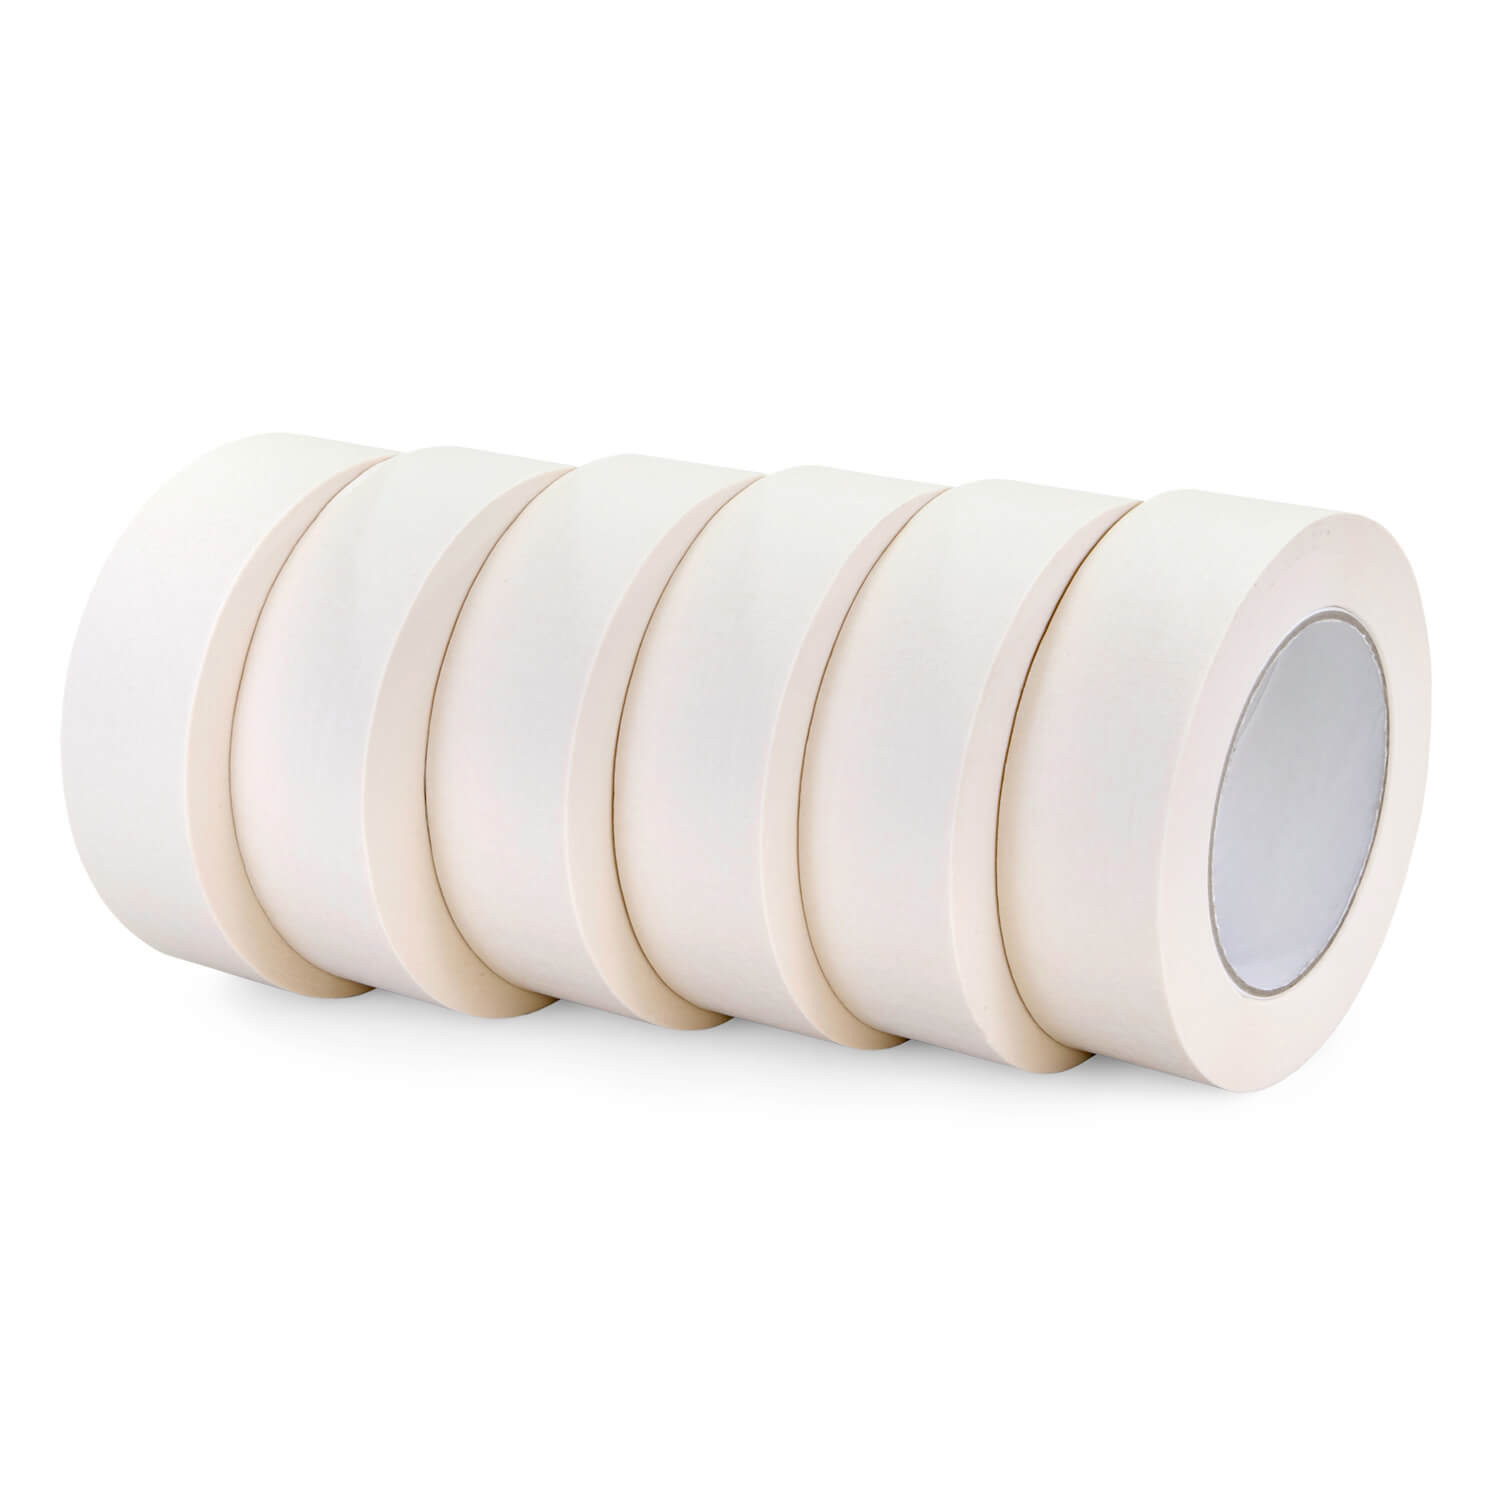 1 1/2 x 60 yards White Masking Tape for General Purpose, Natural Rubber  buy in stock in U.S. in IDL Packaging